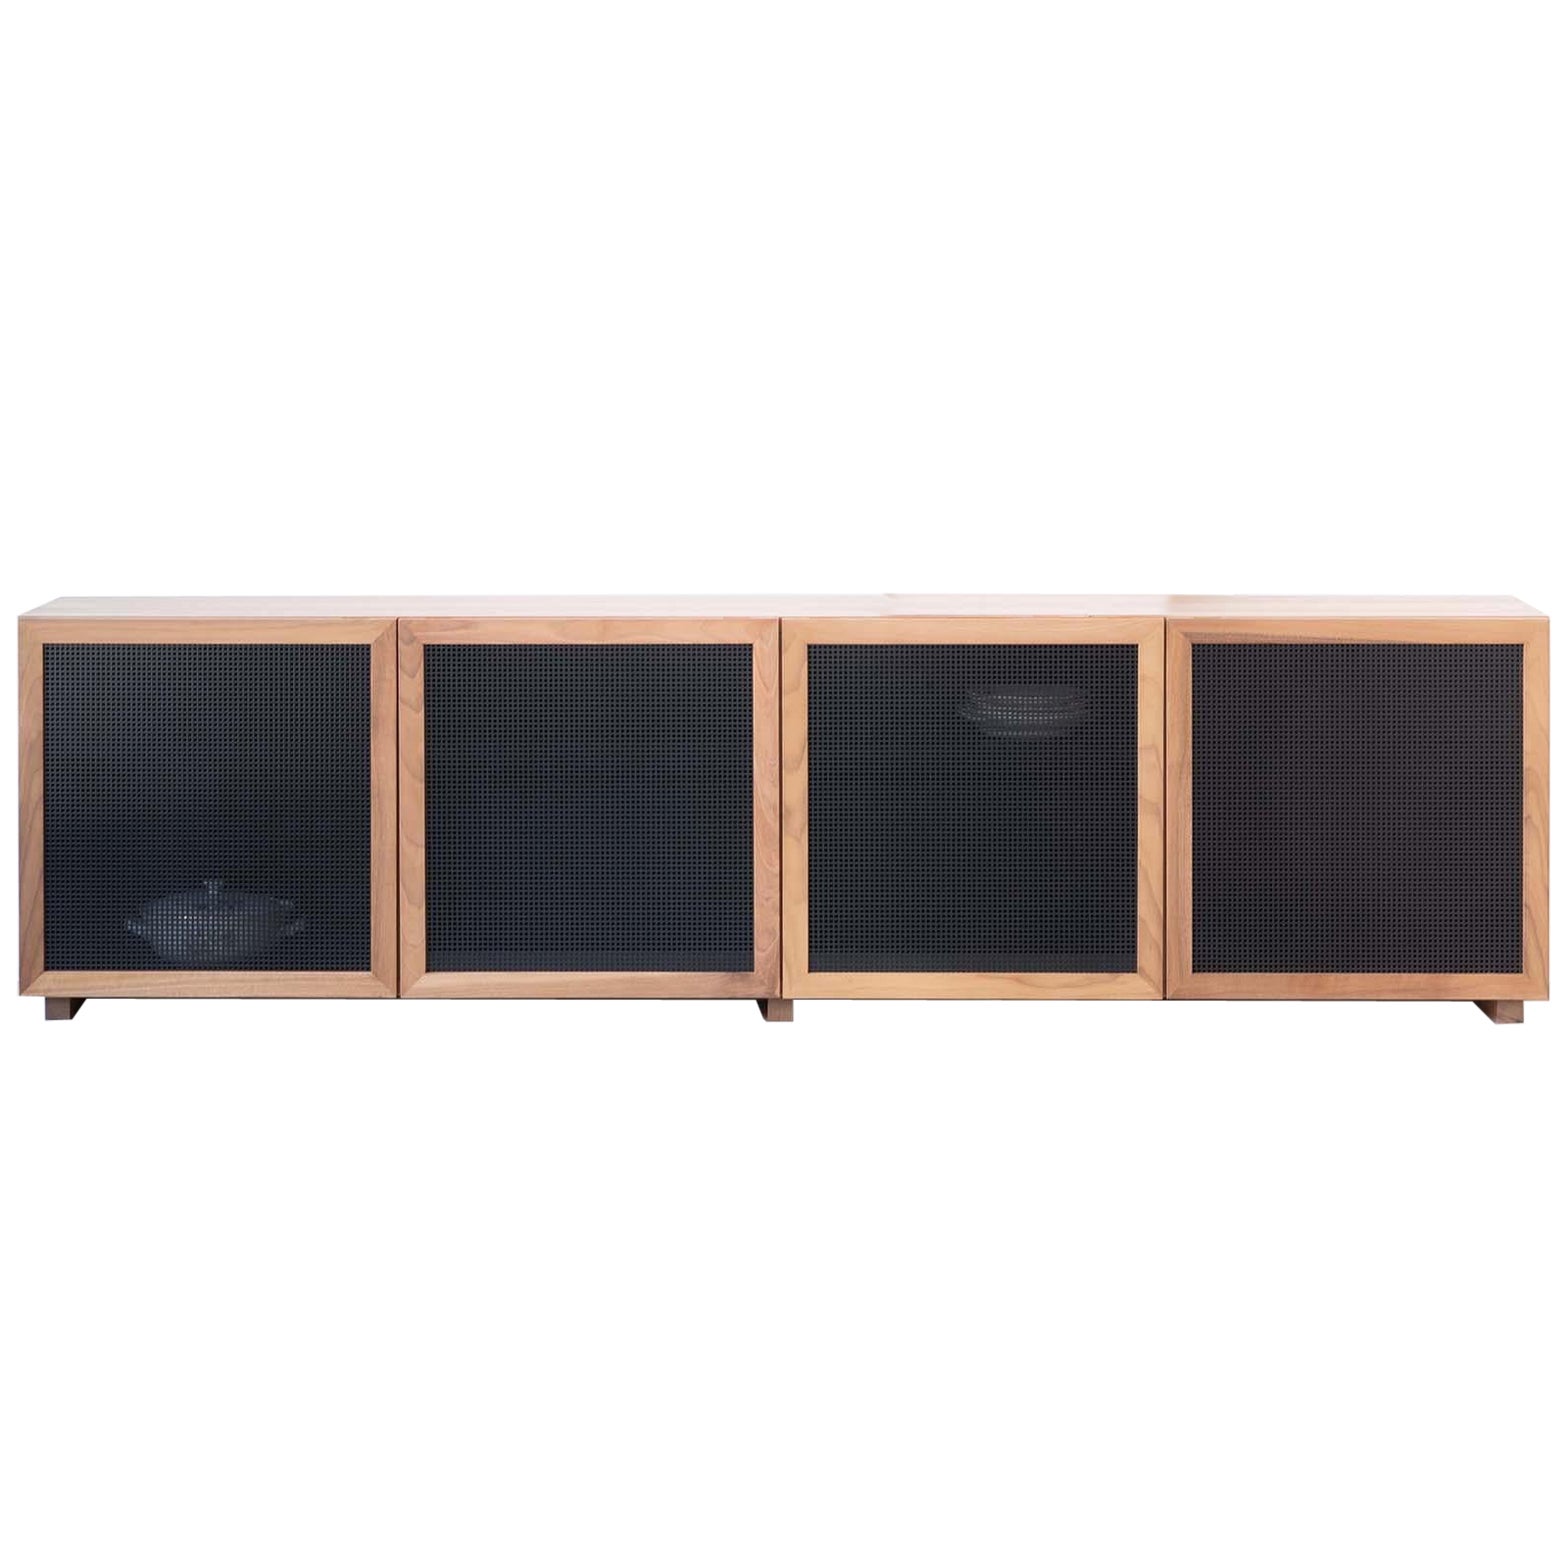 Credenza Bassa 2017 - Low sideboard 2017 For Sale